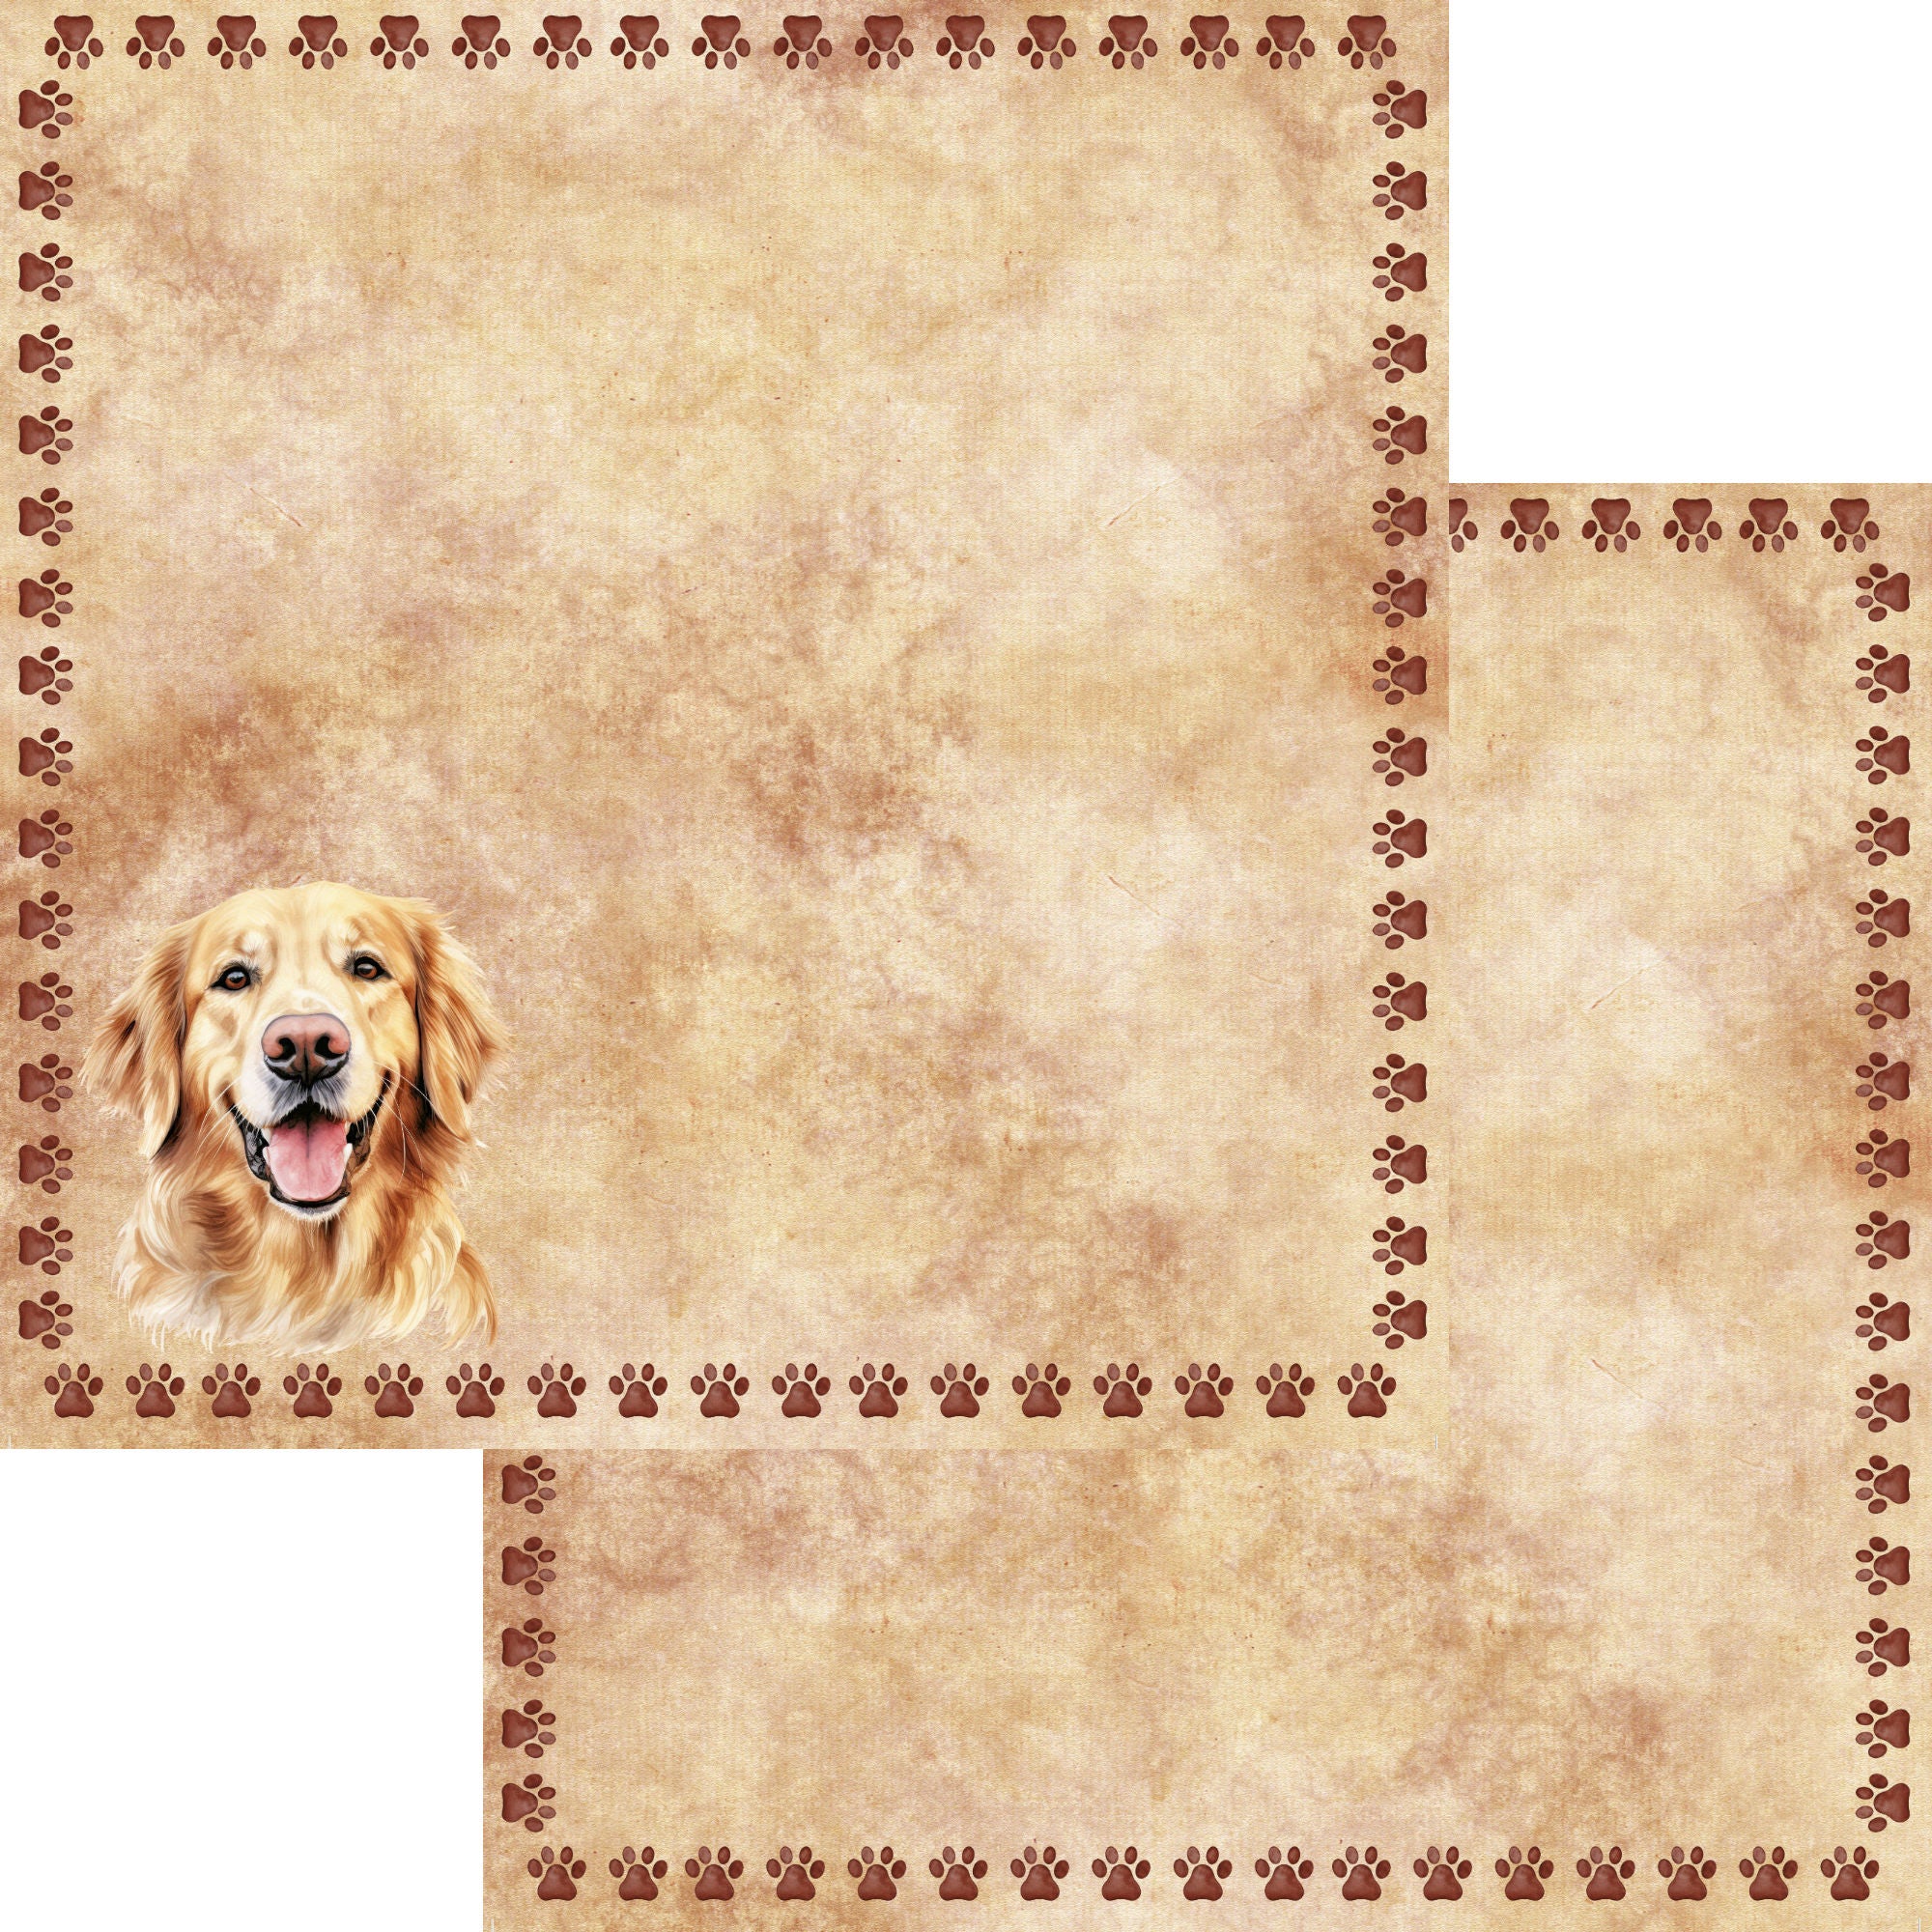 Dog Breeds Collection Golden Retriever 12 x 12 Double-Sided Scrapbook Paper by SSC Designs